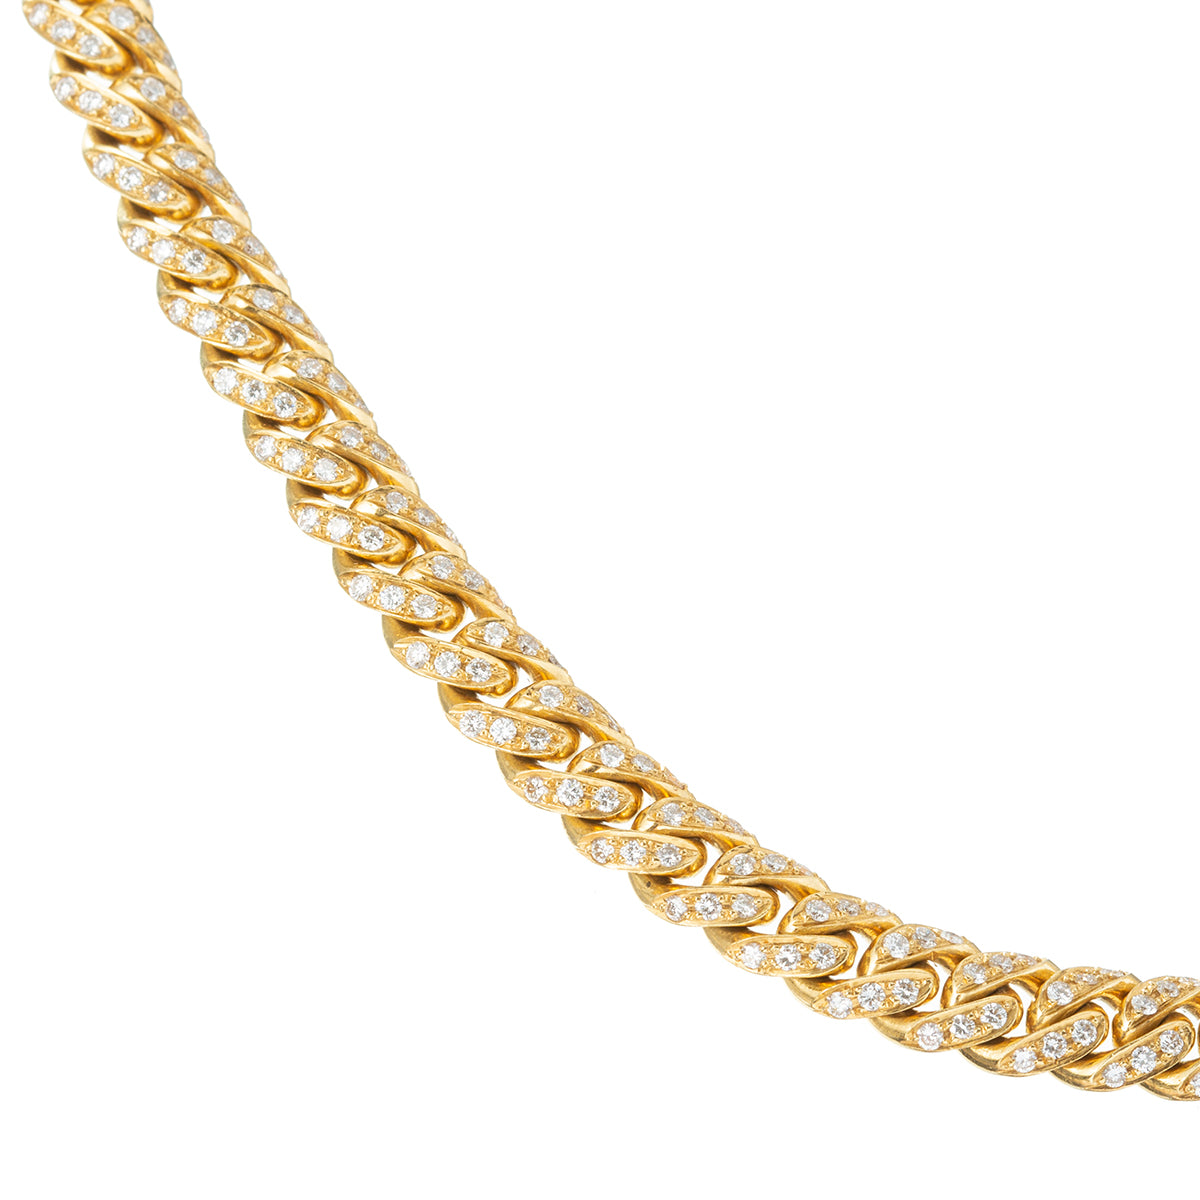 Close Up Detailed Image of 18k Yellow Gold Pavé Diamond Curb-Link Necklace